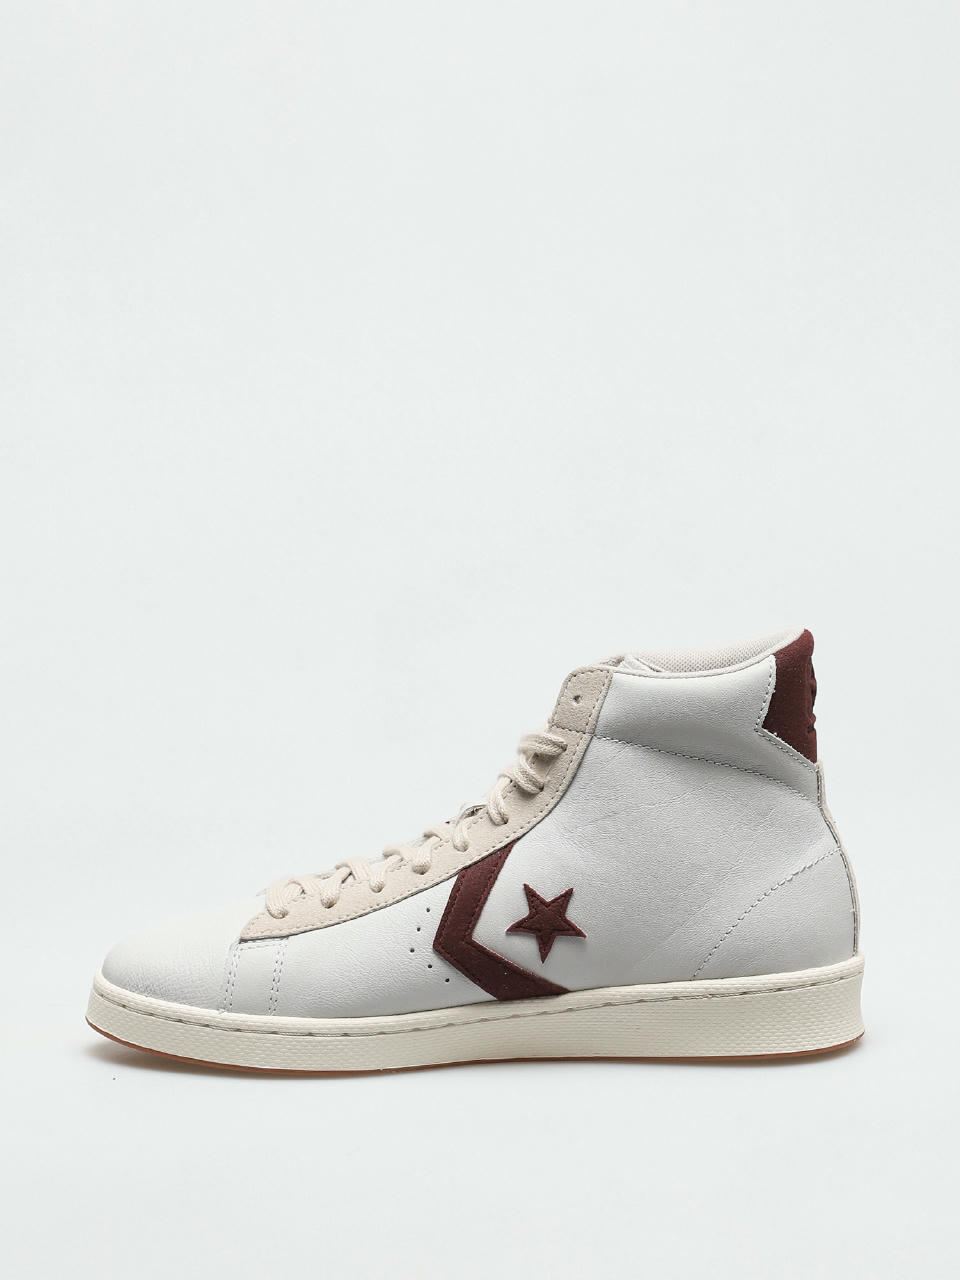 Converse Pro Leather Gold Standard Shoes (white/maroon)